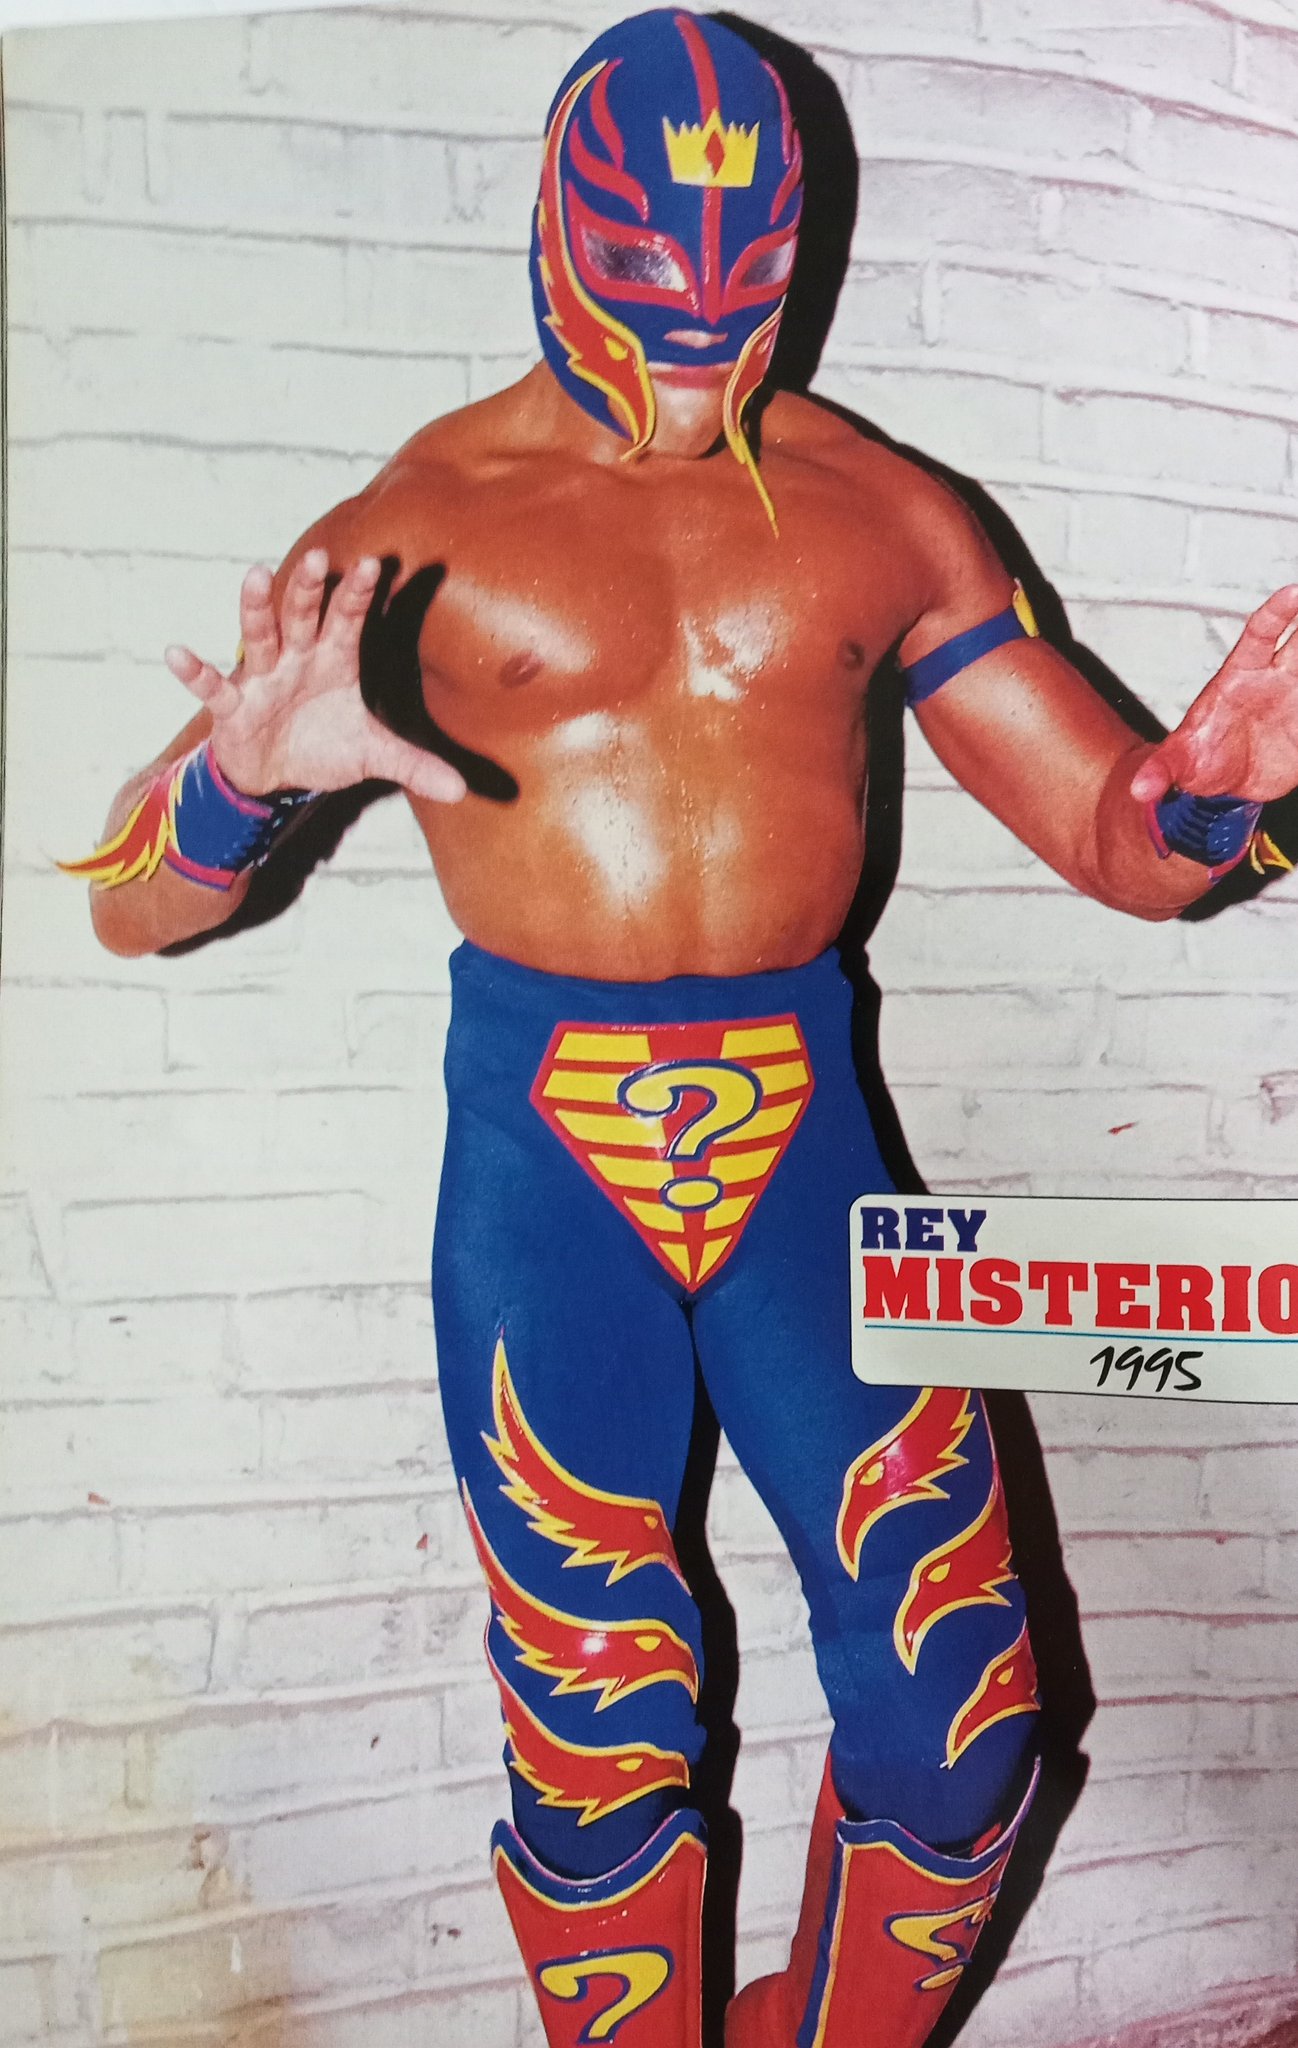 Rasslin History 101 A Shot Of Rey Mysterio Jr Right Around The Time He Got His First Run In The United States In Ecw Back In 1995 T Co Oiyeax6tgw Twitter